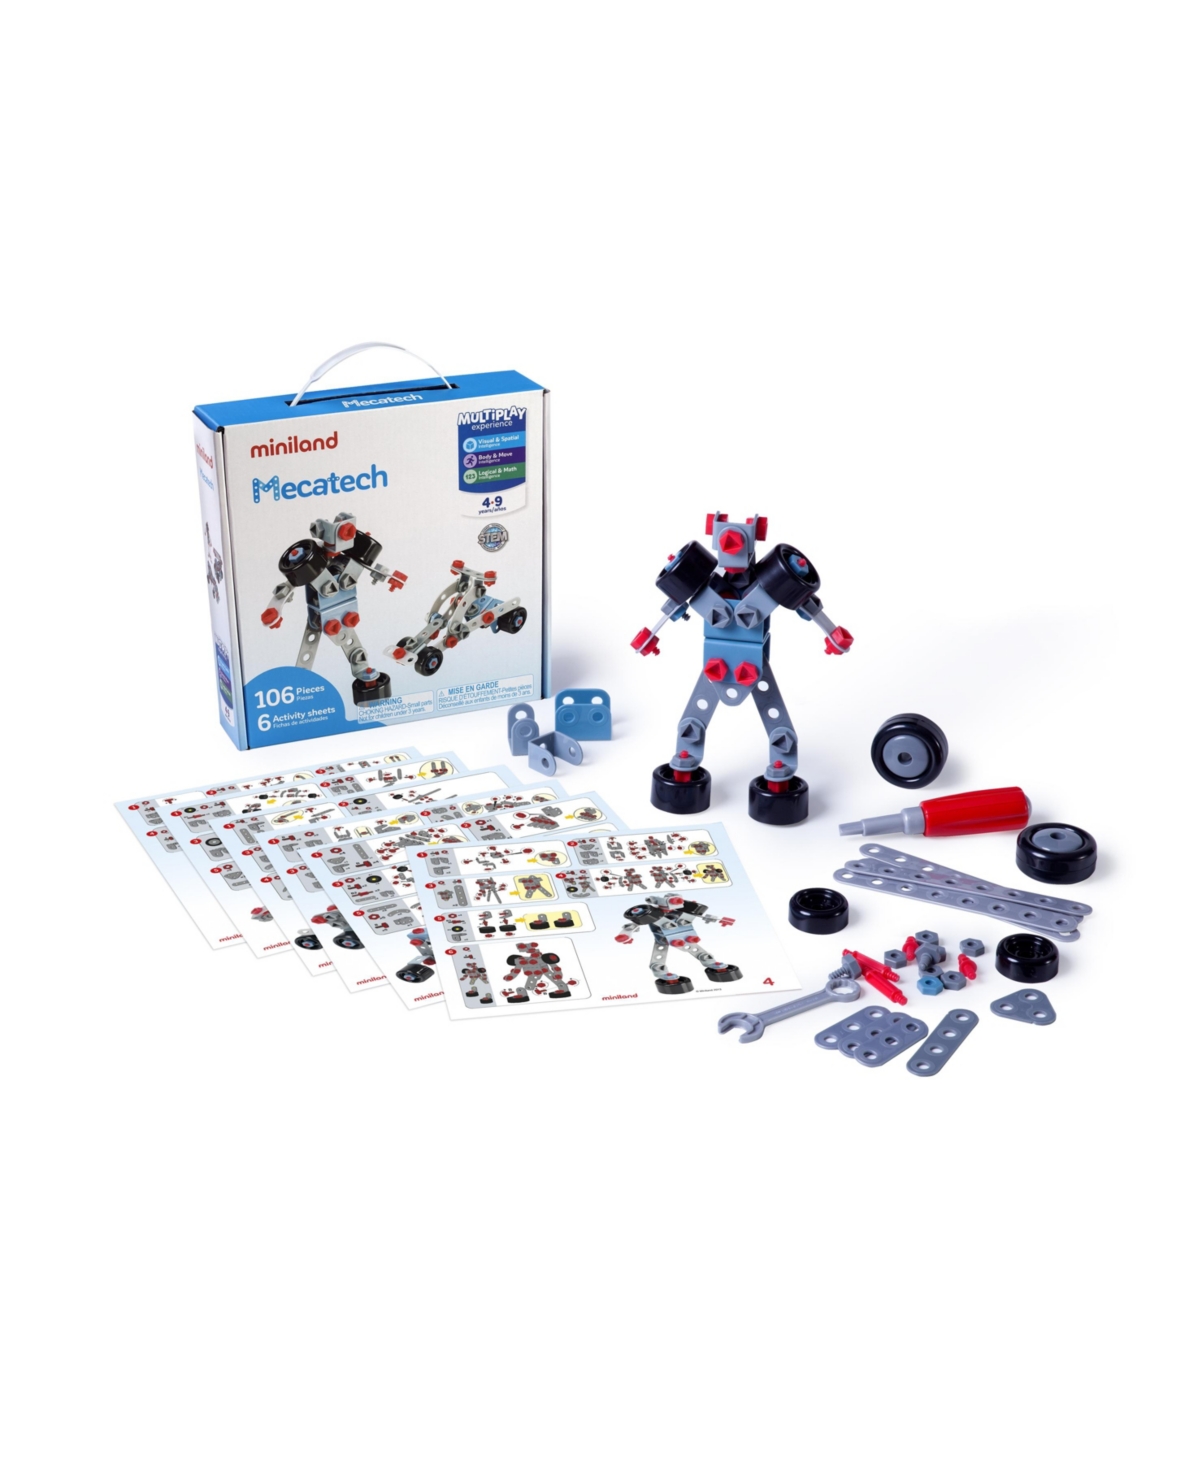 Miniland Game Of Mechanical Constructions With Multiple Assembly Possibilities In Multicolor